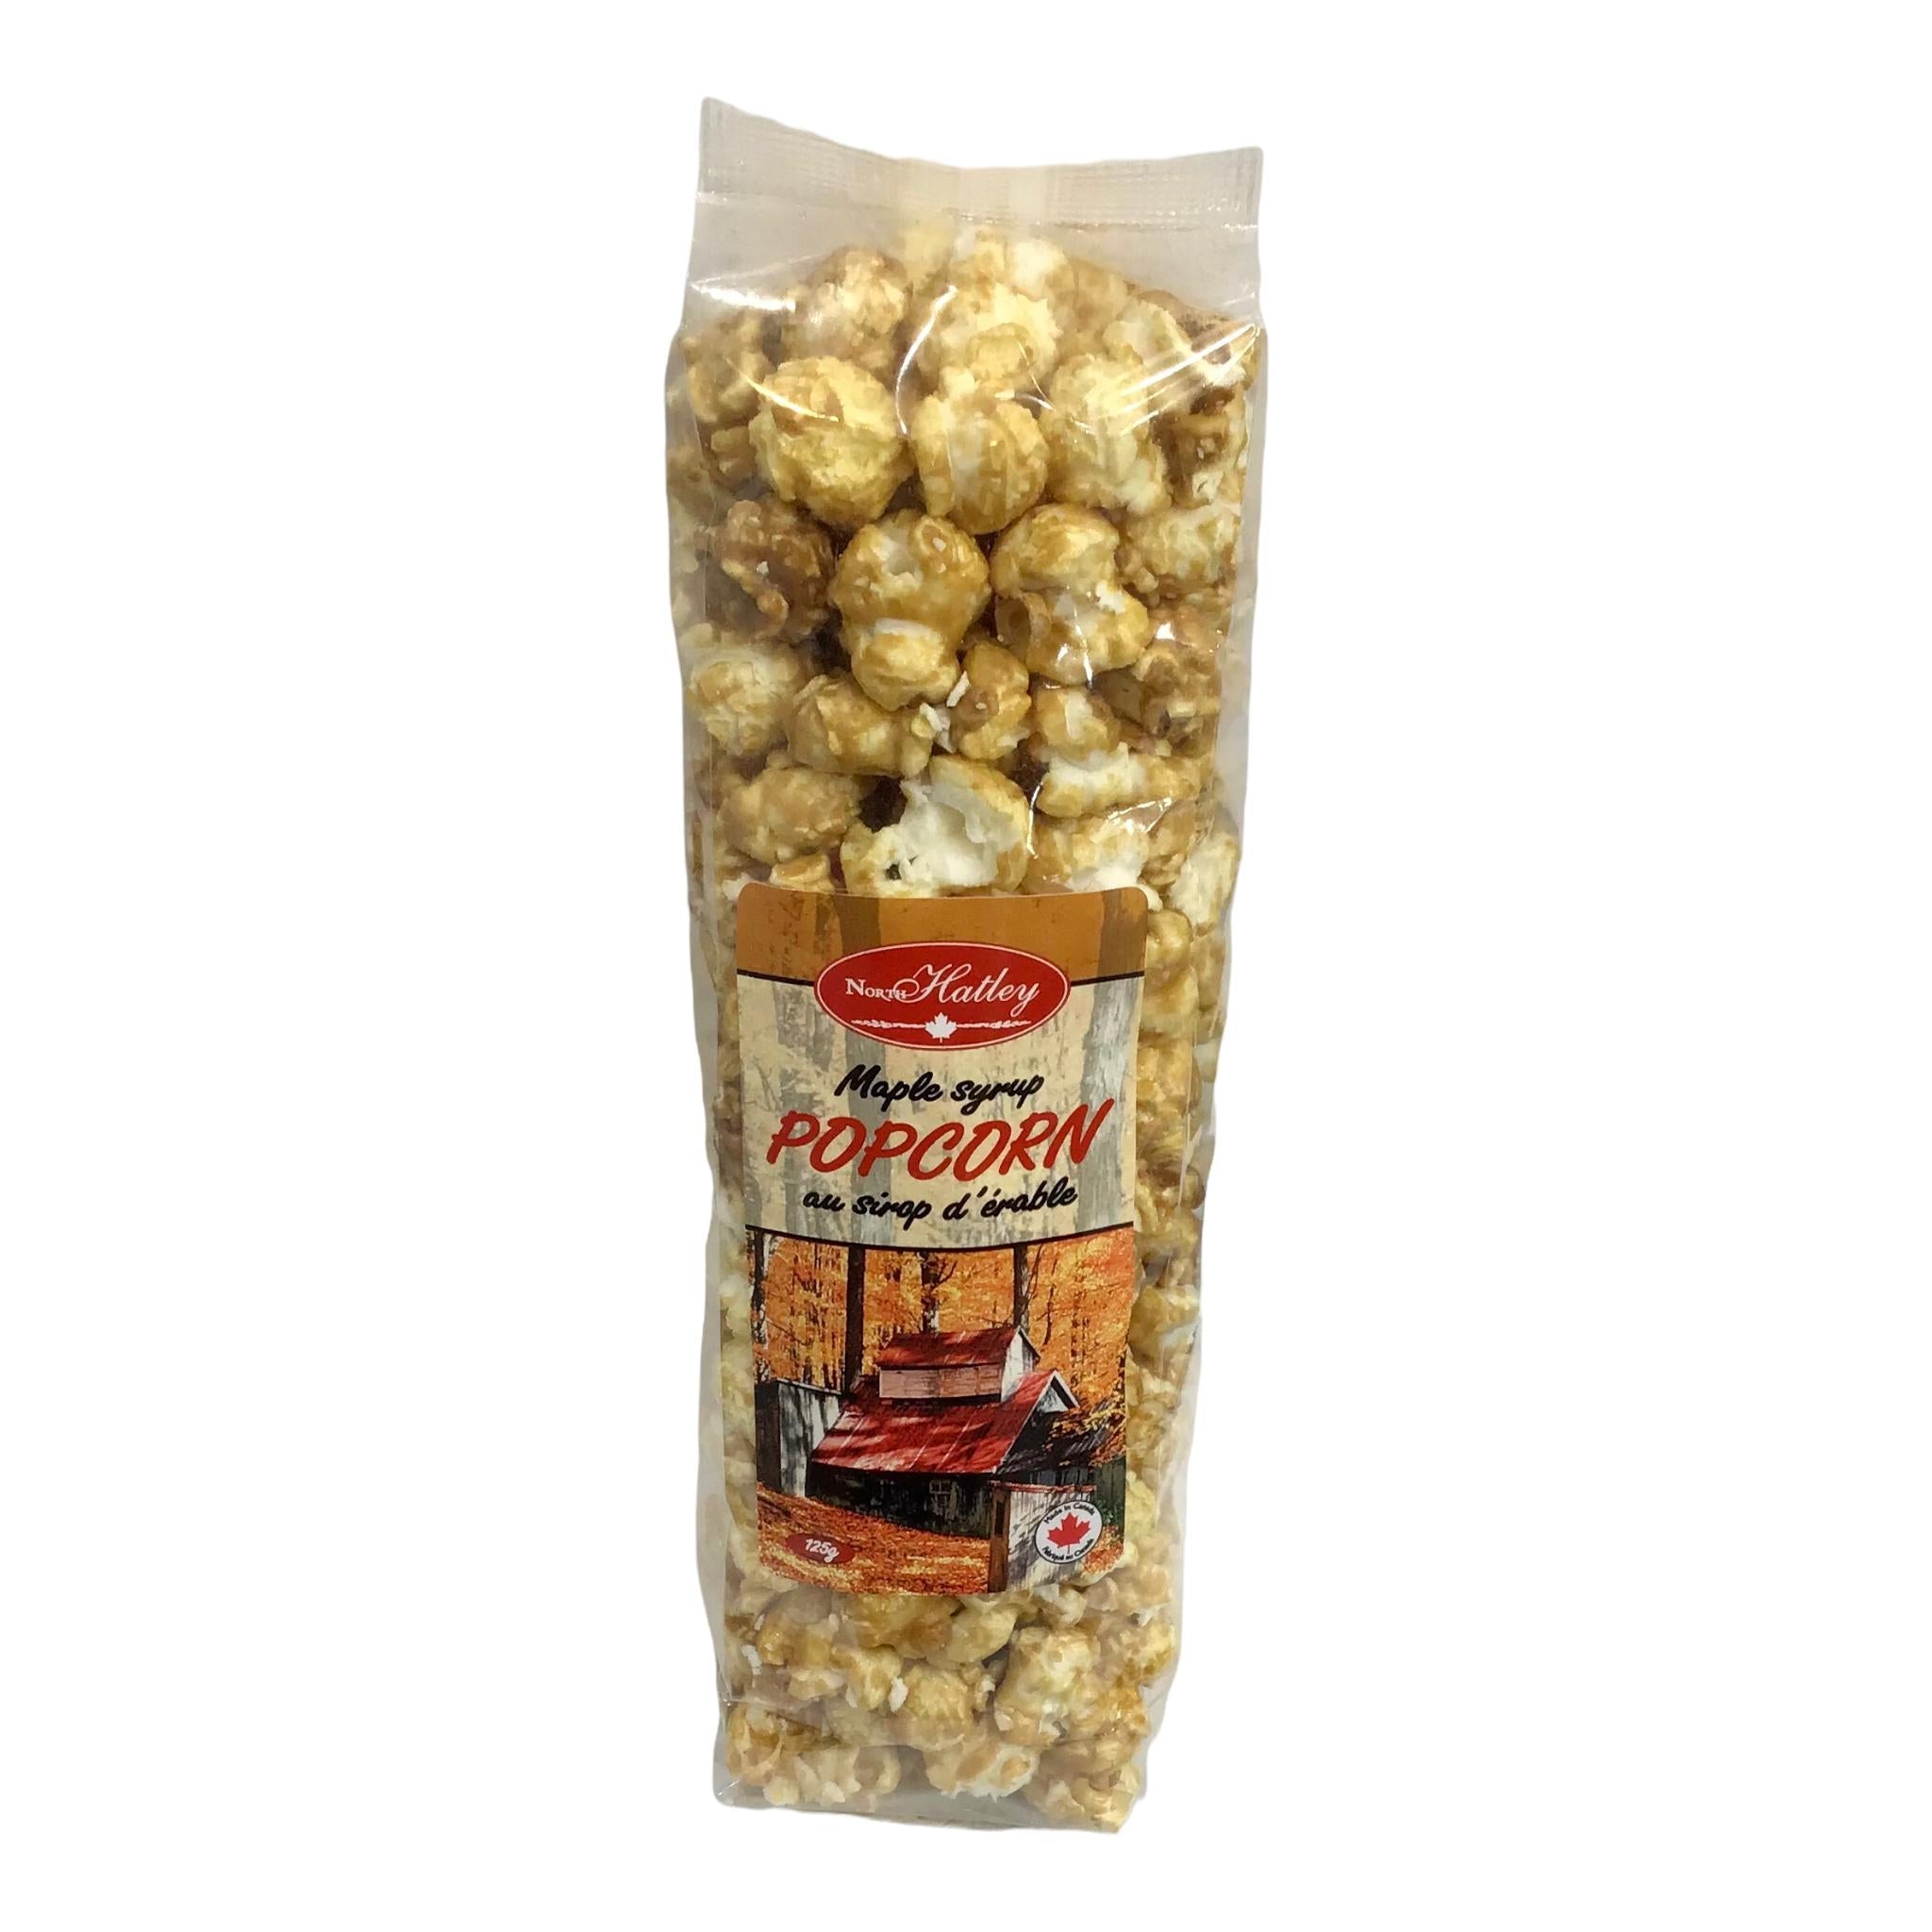 CANADA MAPLE SYRUP POPCORN 125g PACKAGE